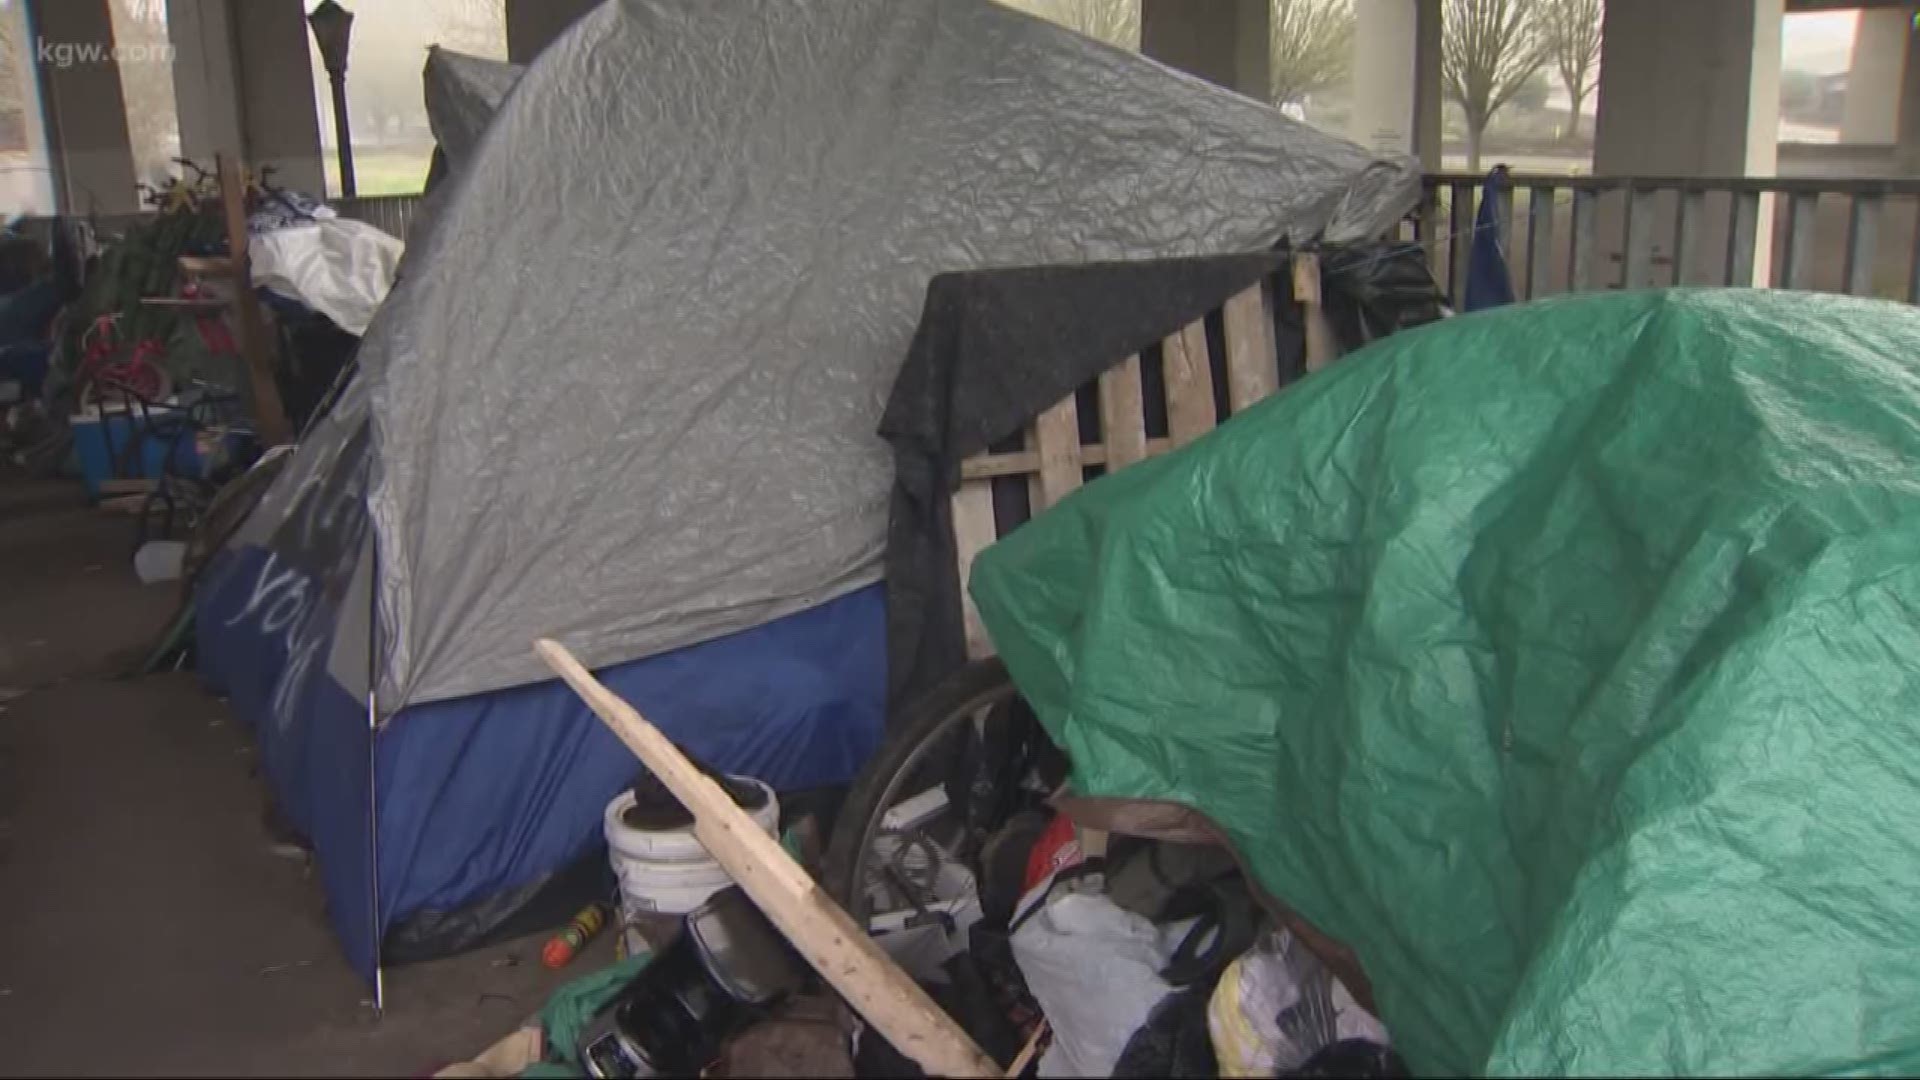 A homeless camp that had taken over a pedestrian walkway on the western border of downtown Salem was swept out Monday morning.